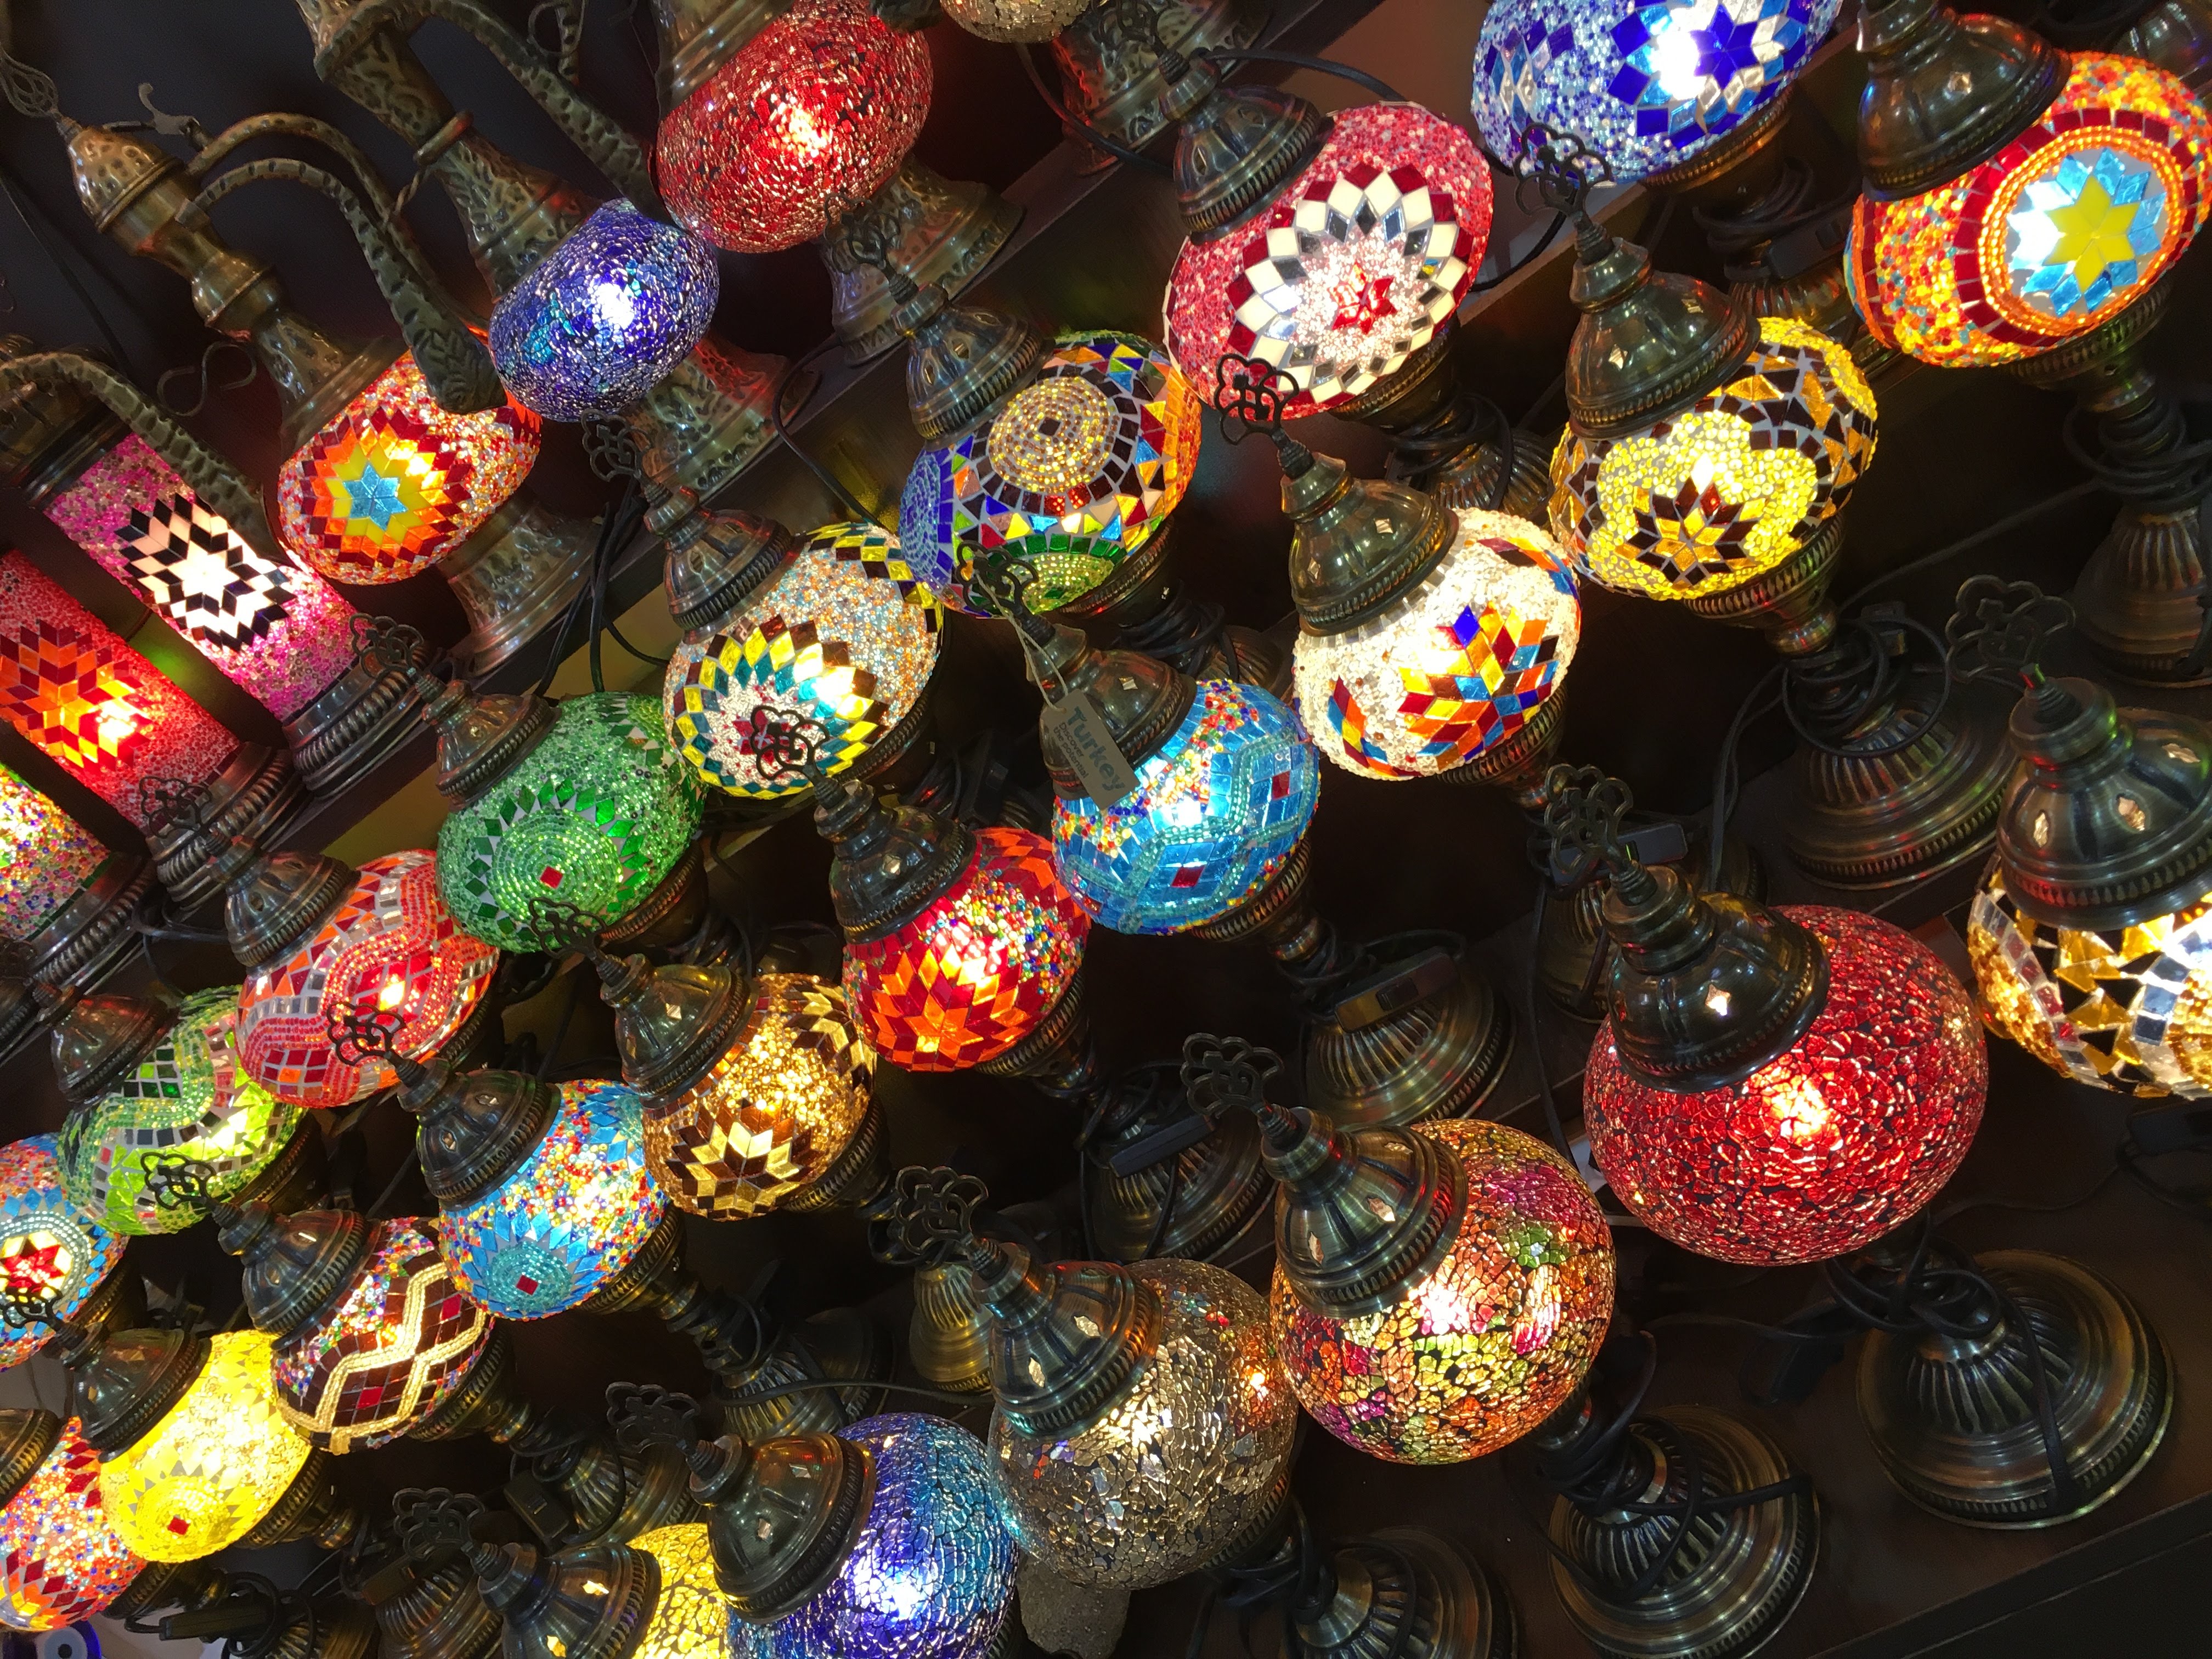 Colorful lamps in the Grand Bazaar | Denitsa Yosifova for AUBG Daily